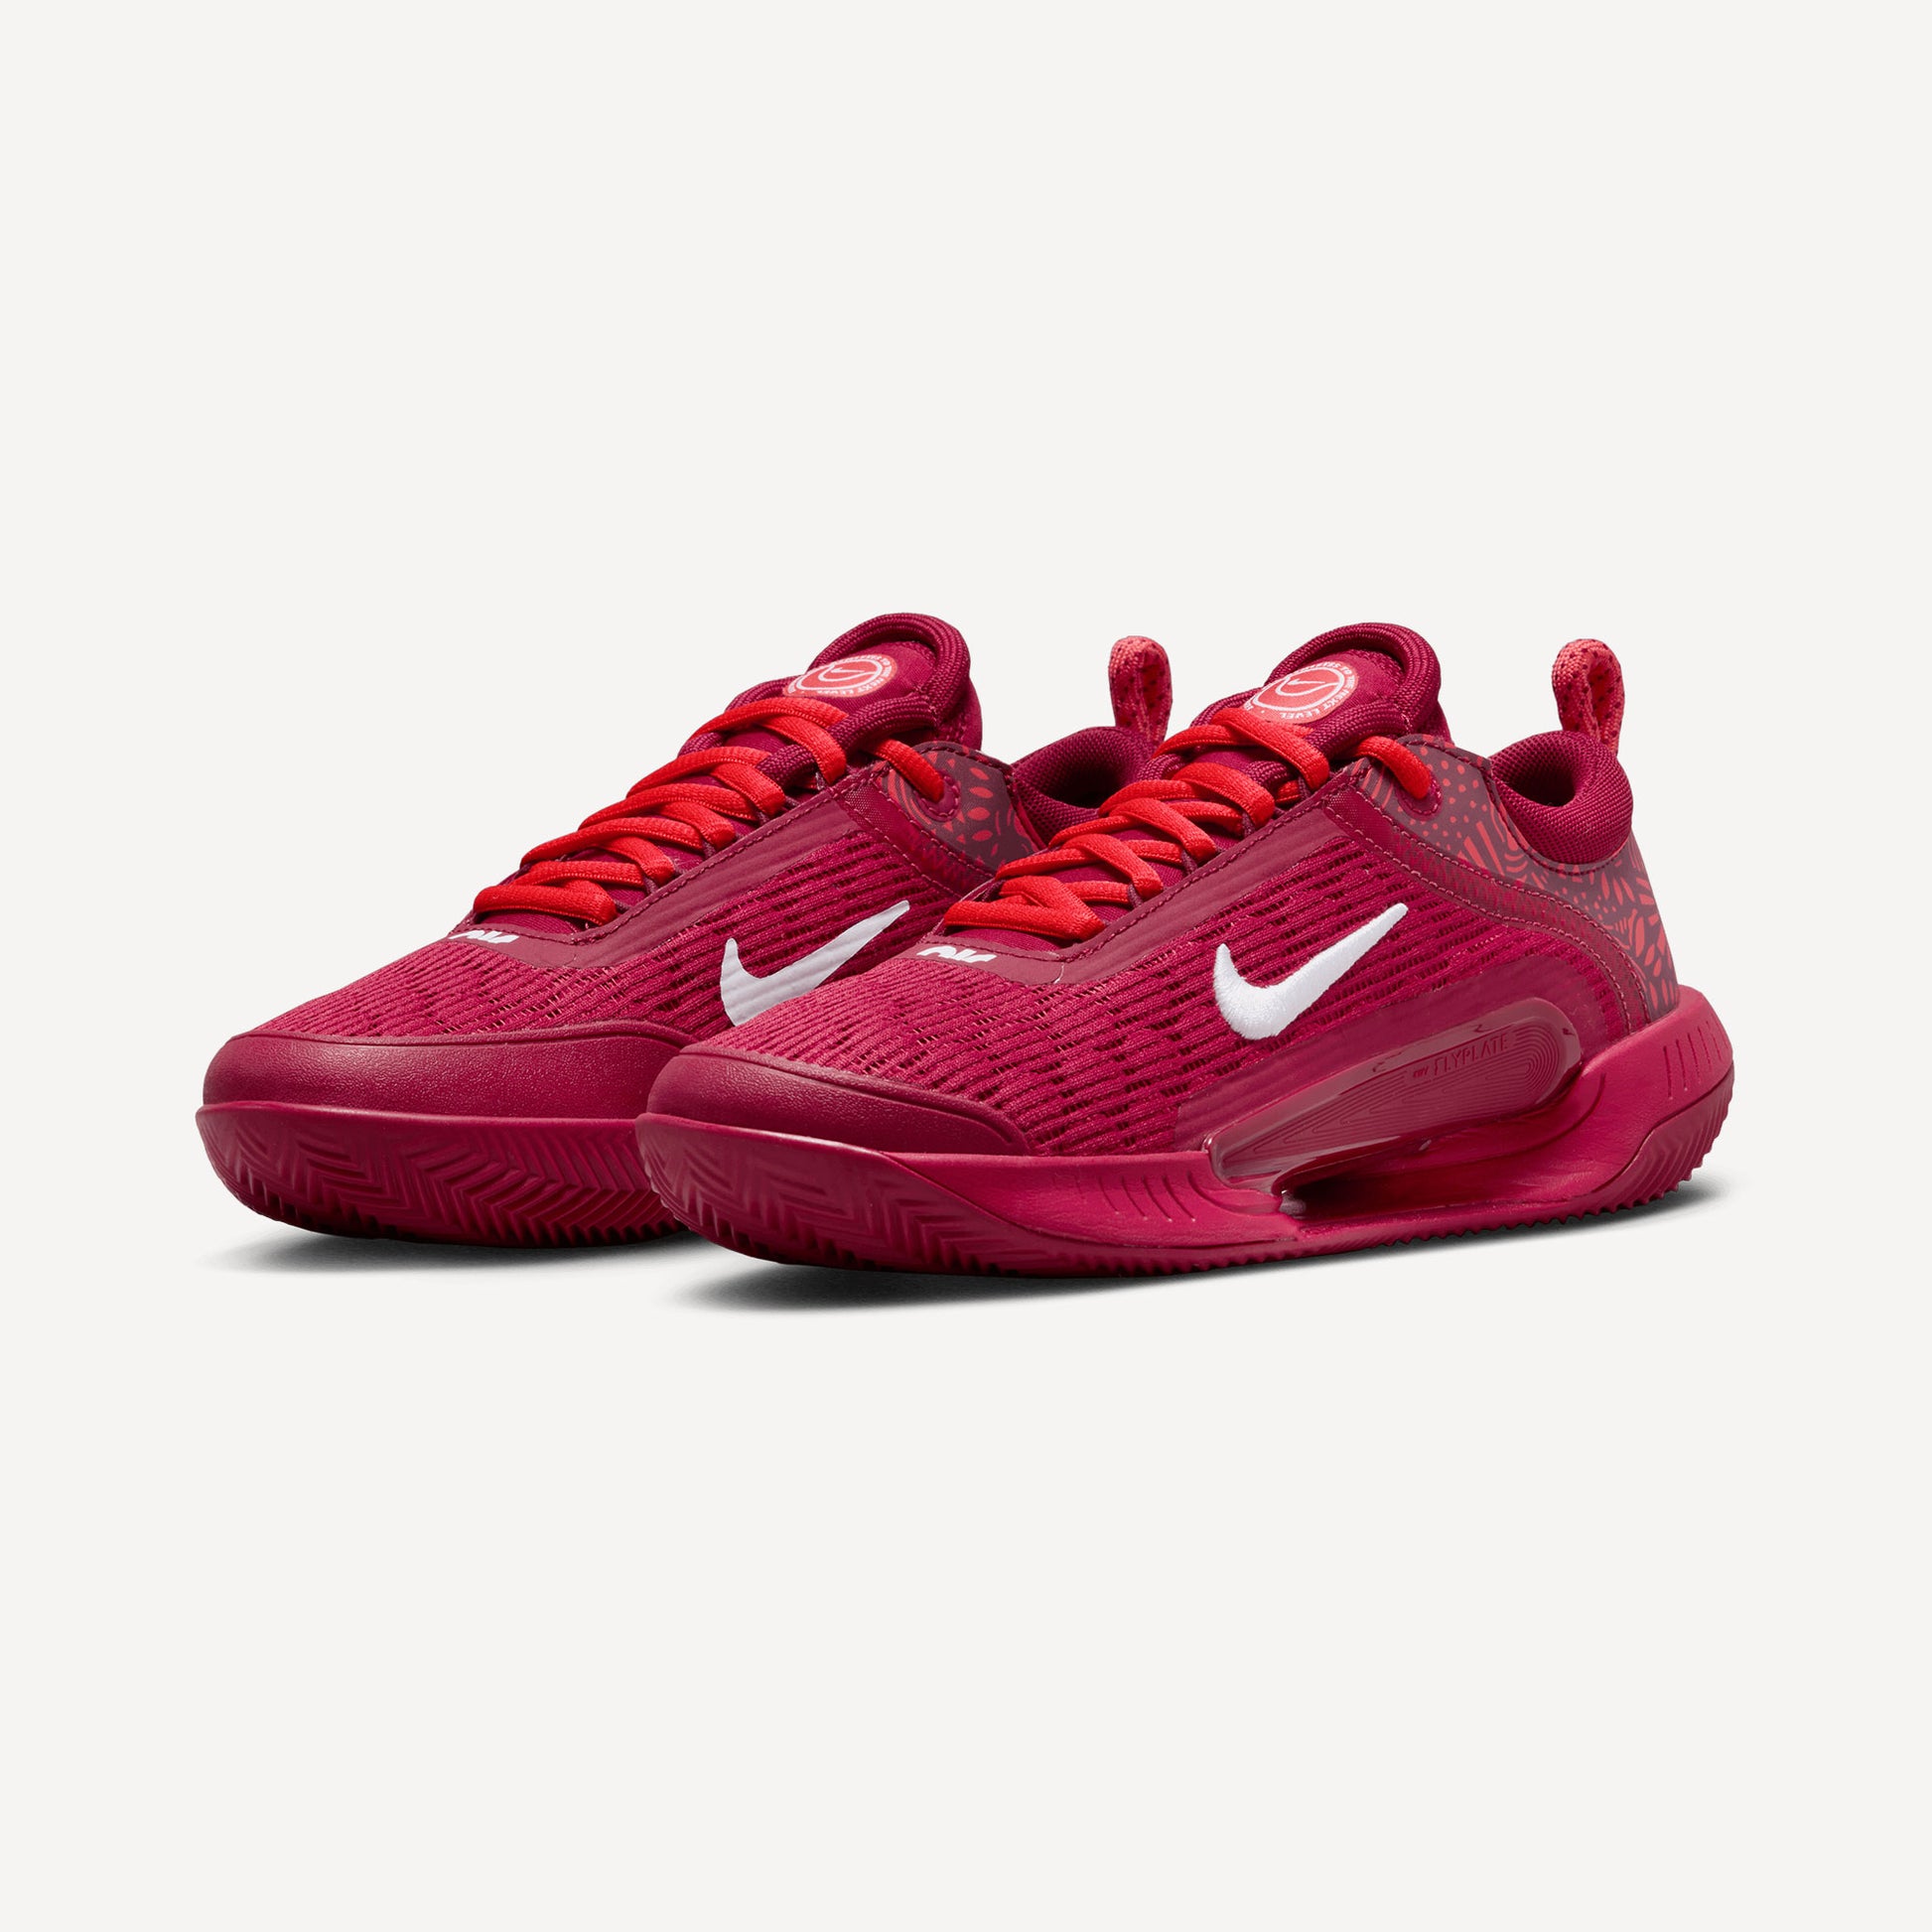 NikeCourt Zoom Court NXT Women's Clay Court Tennis Shoes Red (4)